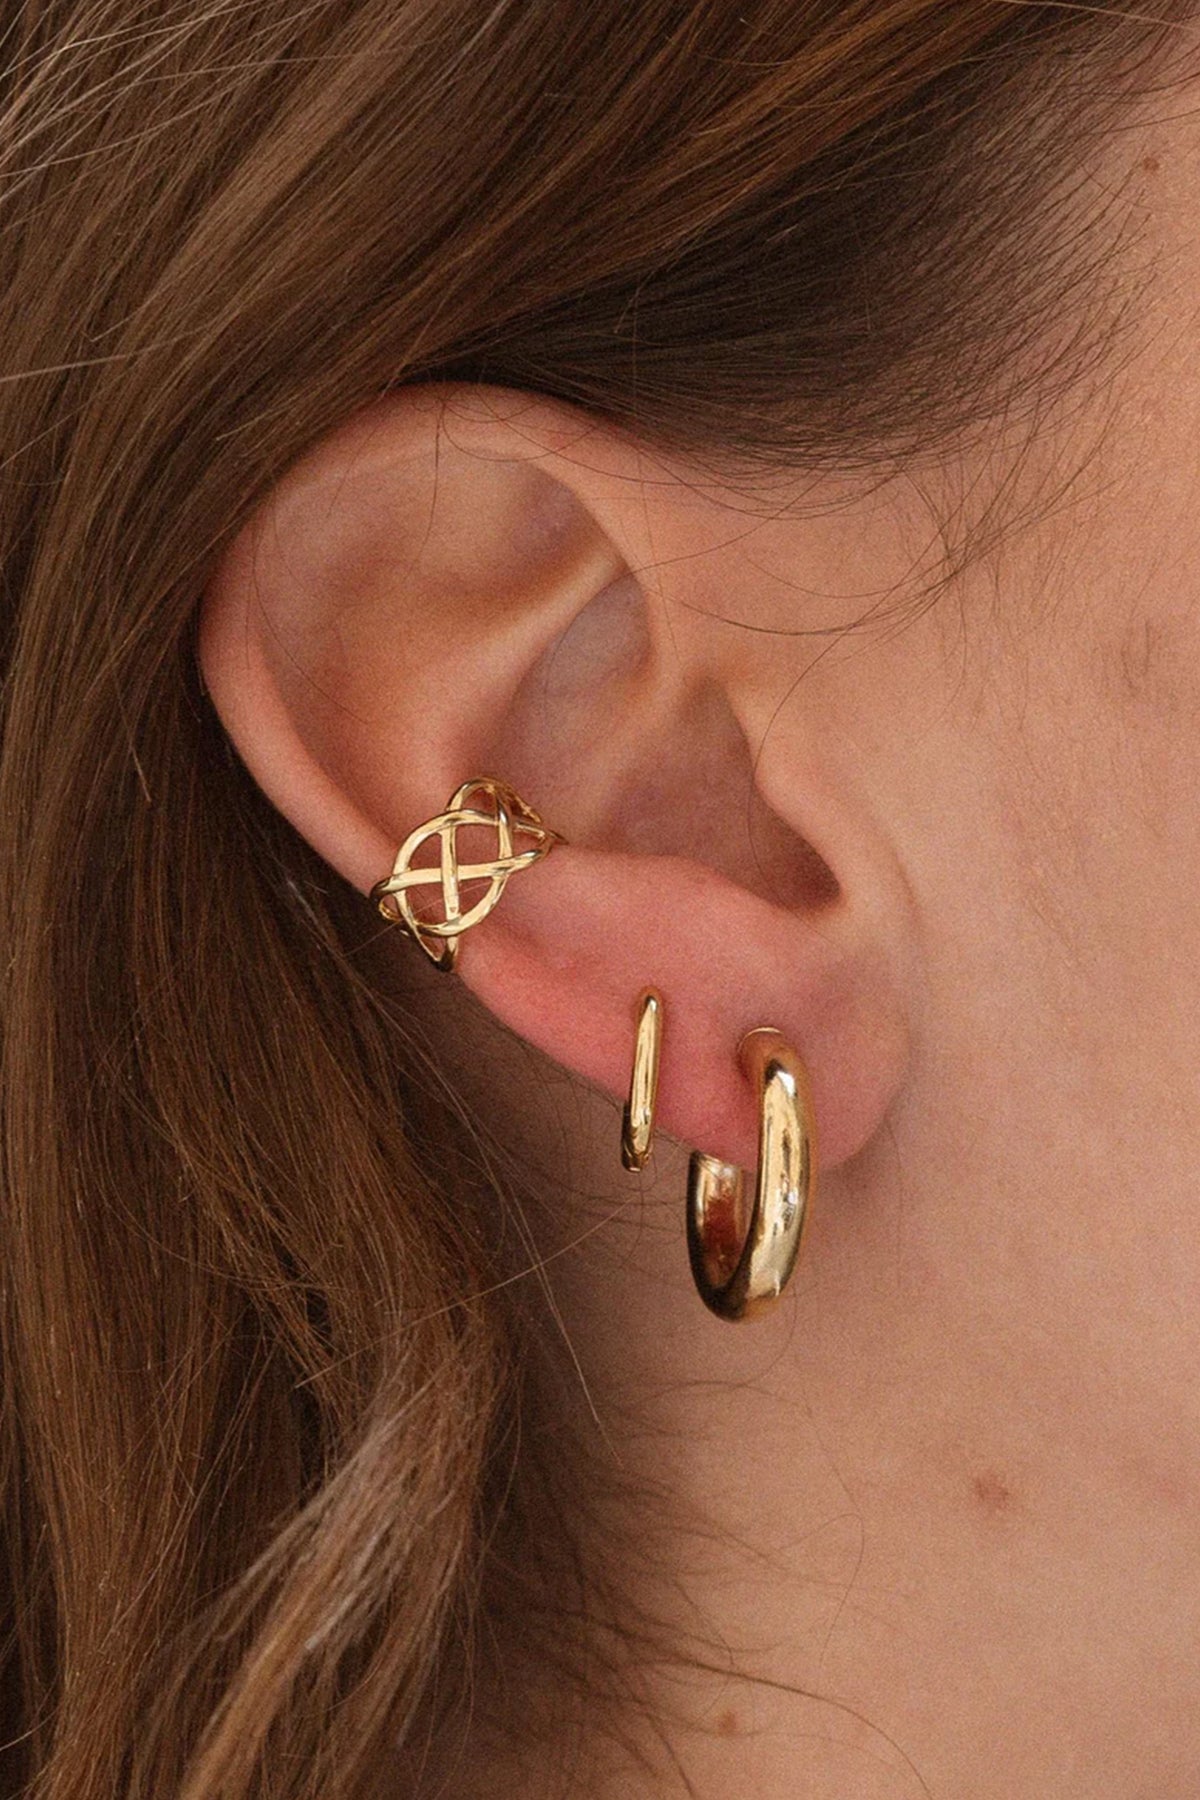 EARRINGS "OCTAVE" GOLD